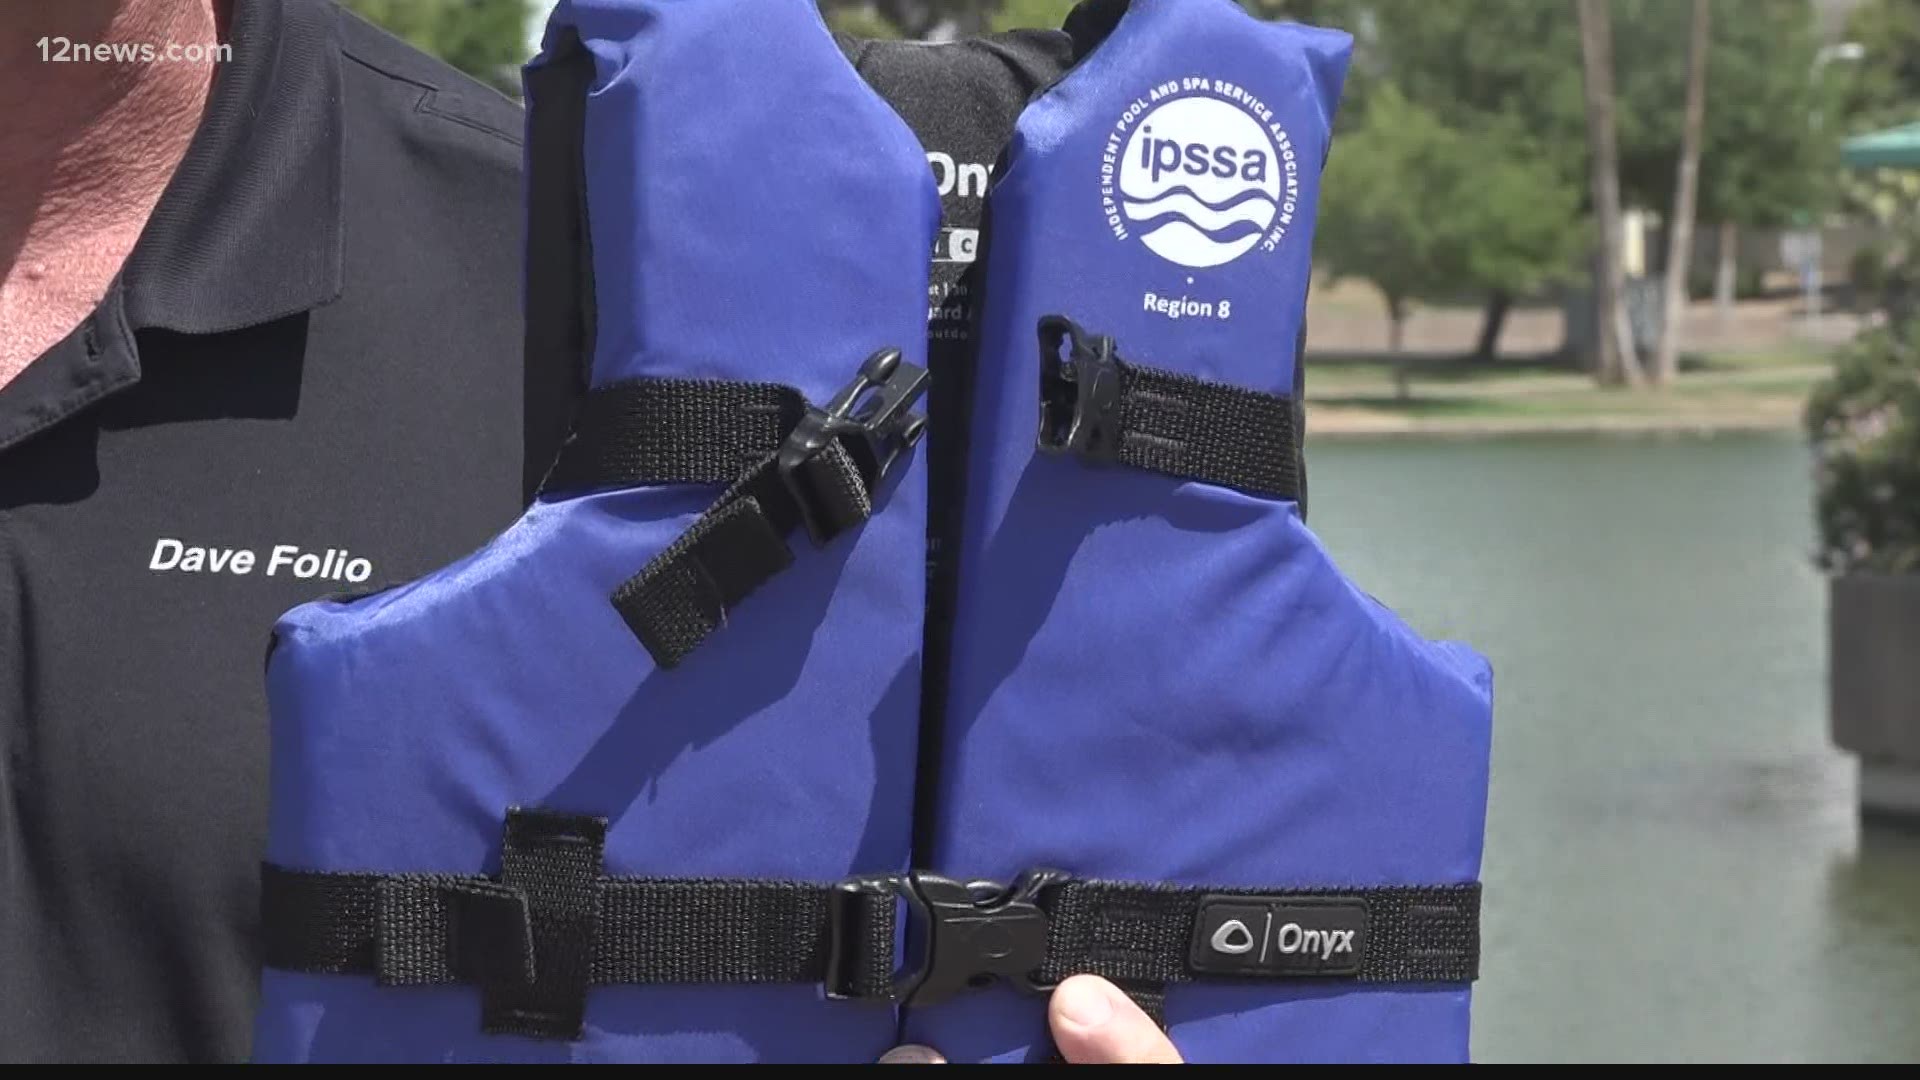 Officials give tips for adults and children to stay safe while swimming this summer.